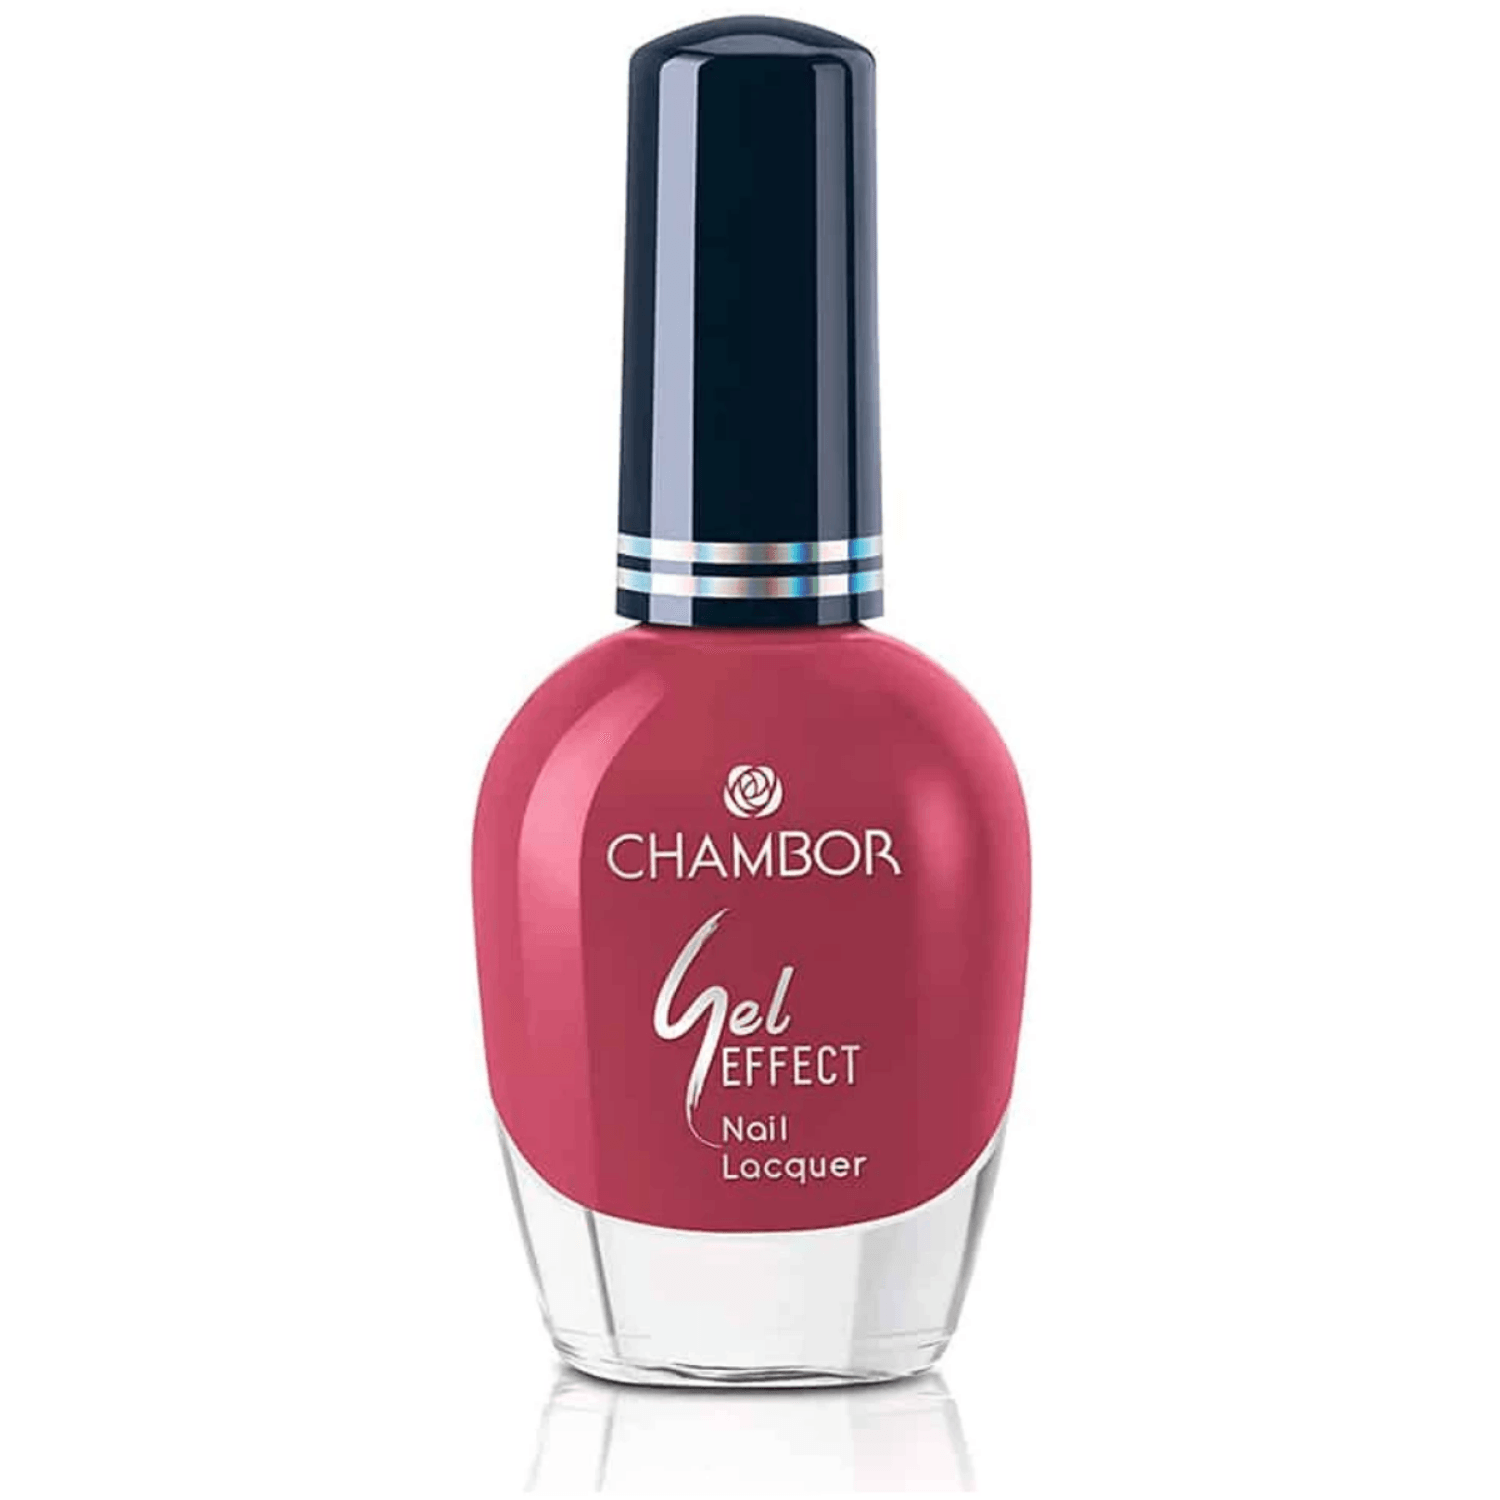 Buy FYORR Long Lasting And Pigmented Nail Polish Enamel Color (Russian Red)  (15ml) Online at Low Prices in India - Amazon.in